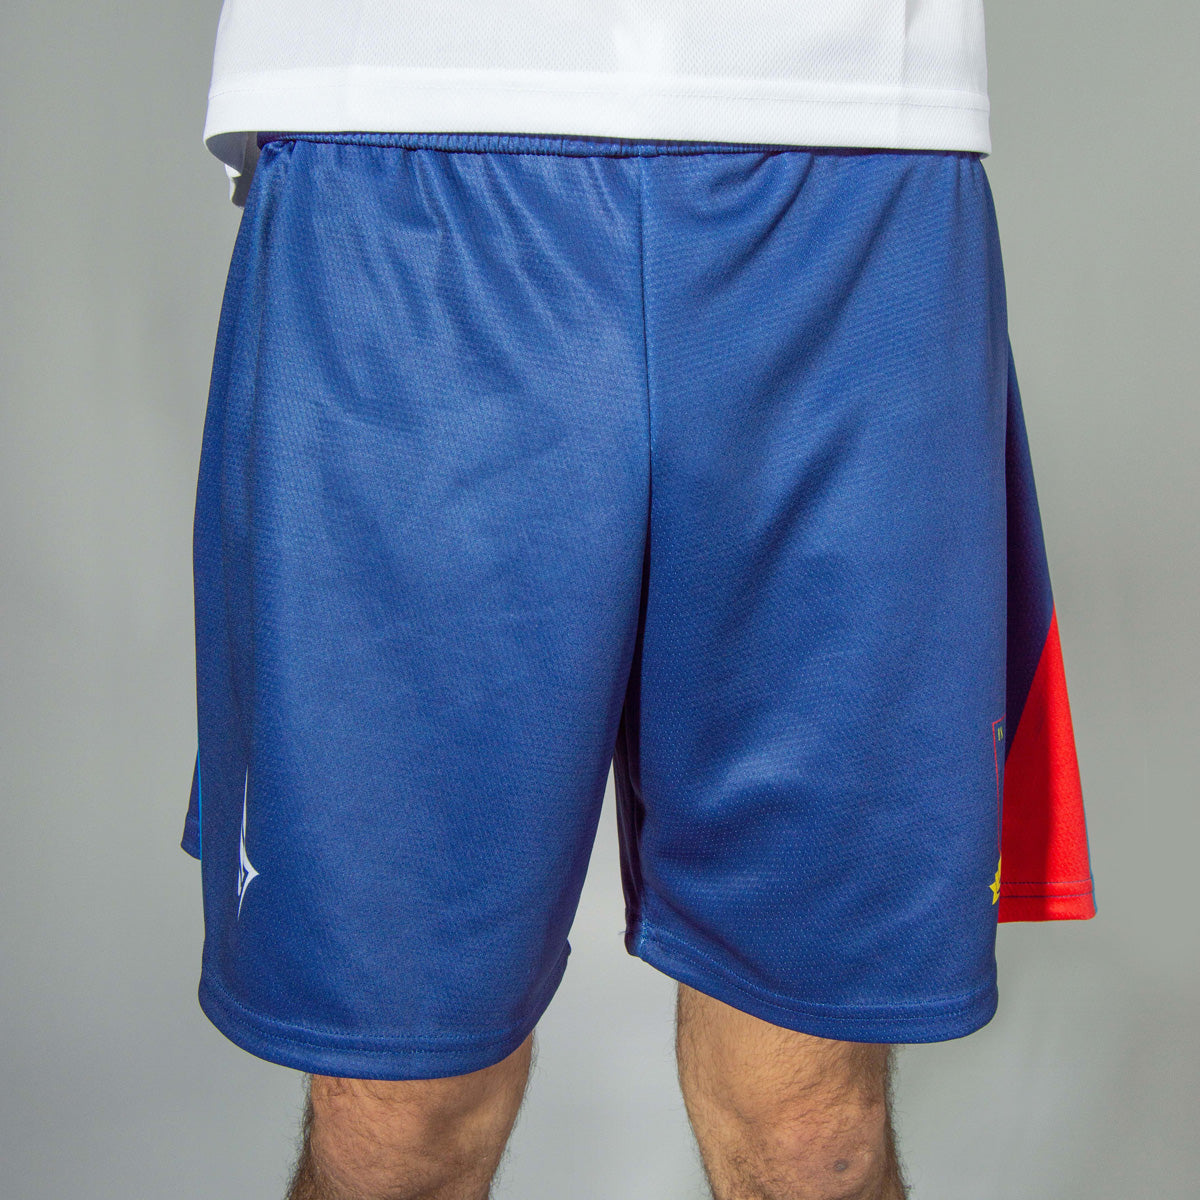 Exclusive Ted Lasso A.F.C. Richmond Navy Training Shorts